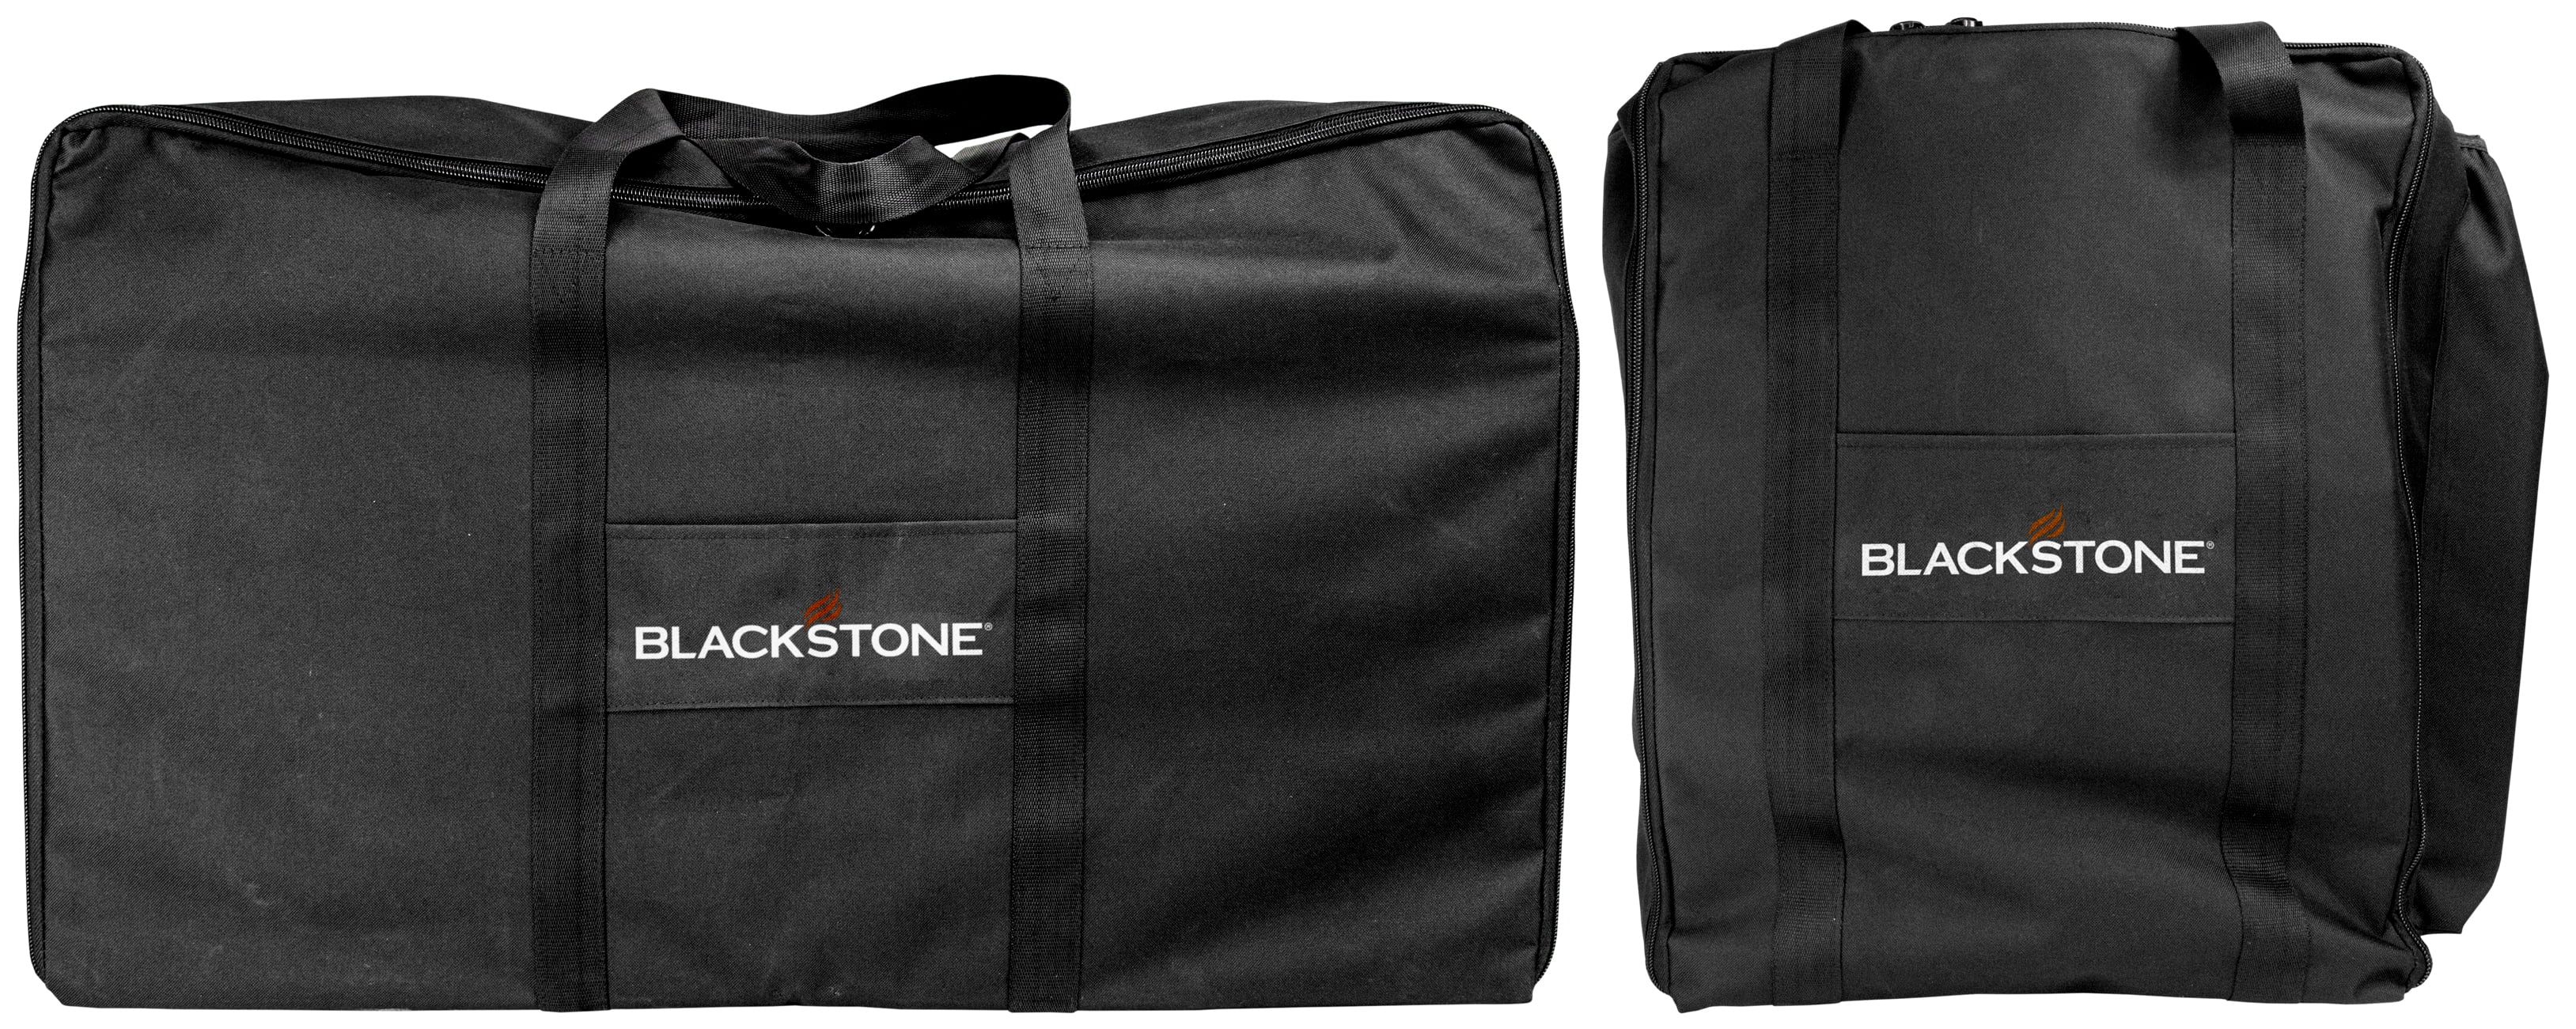 1722 New Blackstone 22" Table Top Griddle Cover and Carry Bag Combo Set 